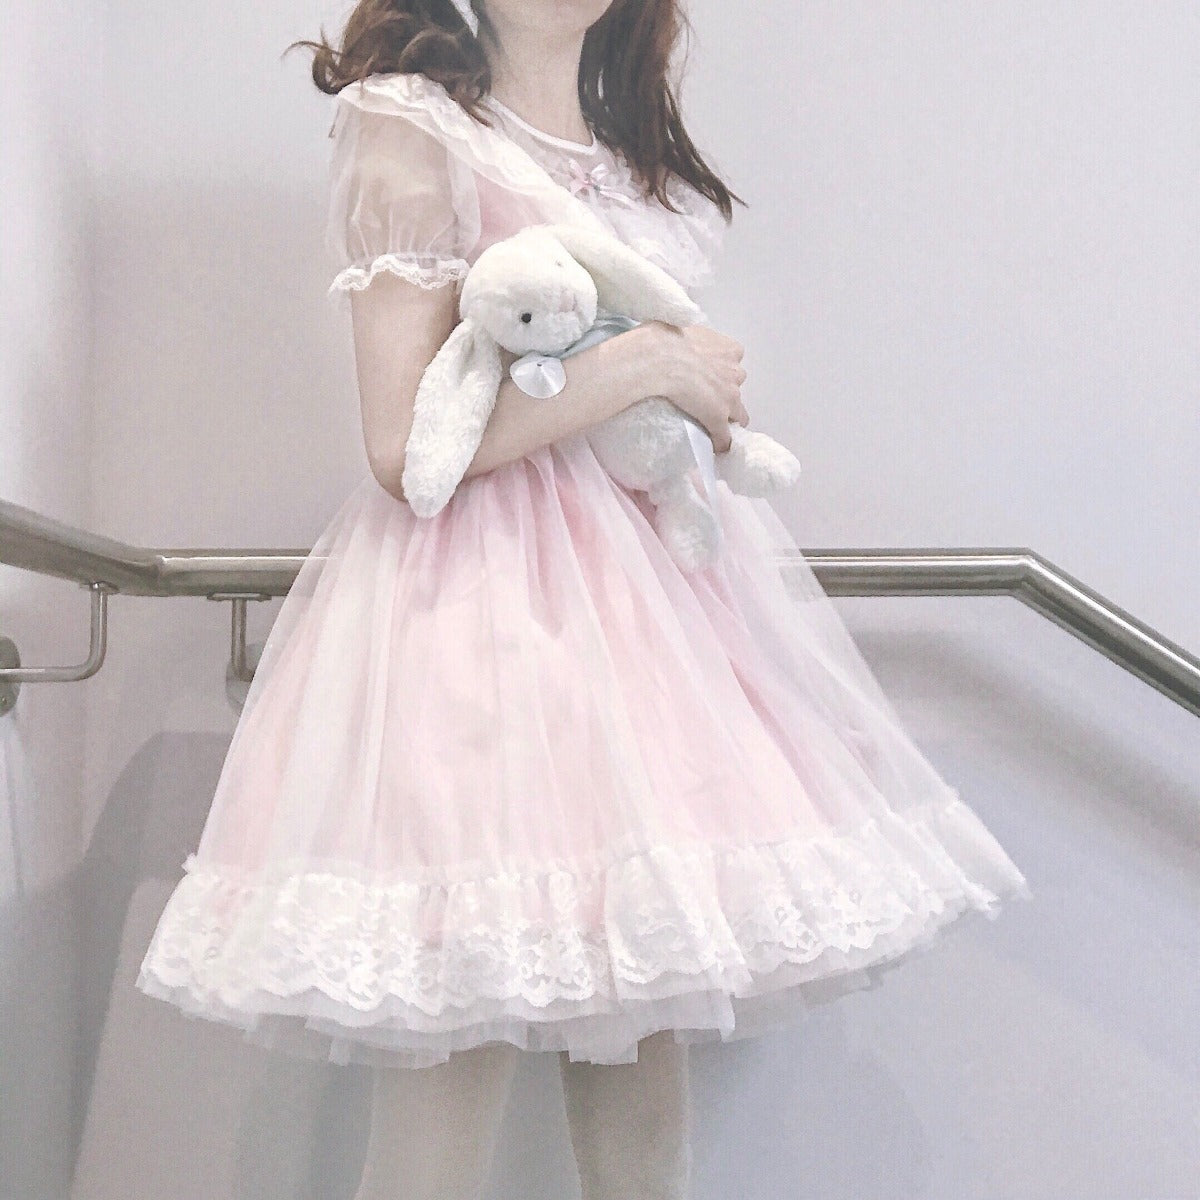 Japanese New Style Sweet And Cute Bowknot Dress - Jam Garden